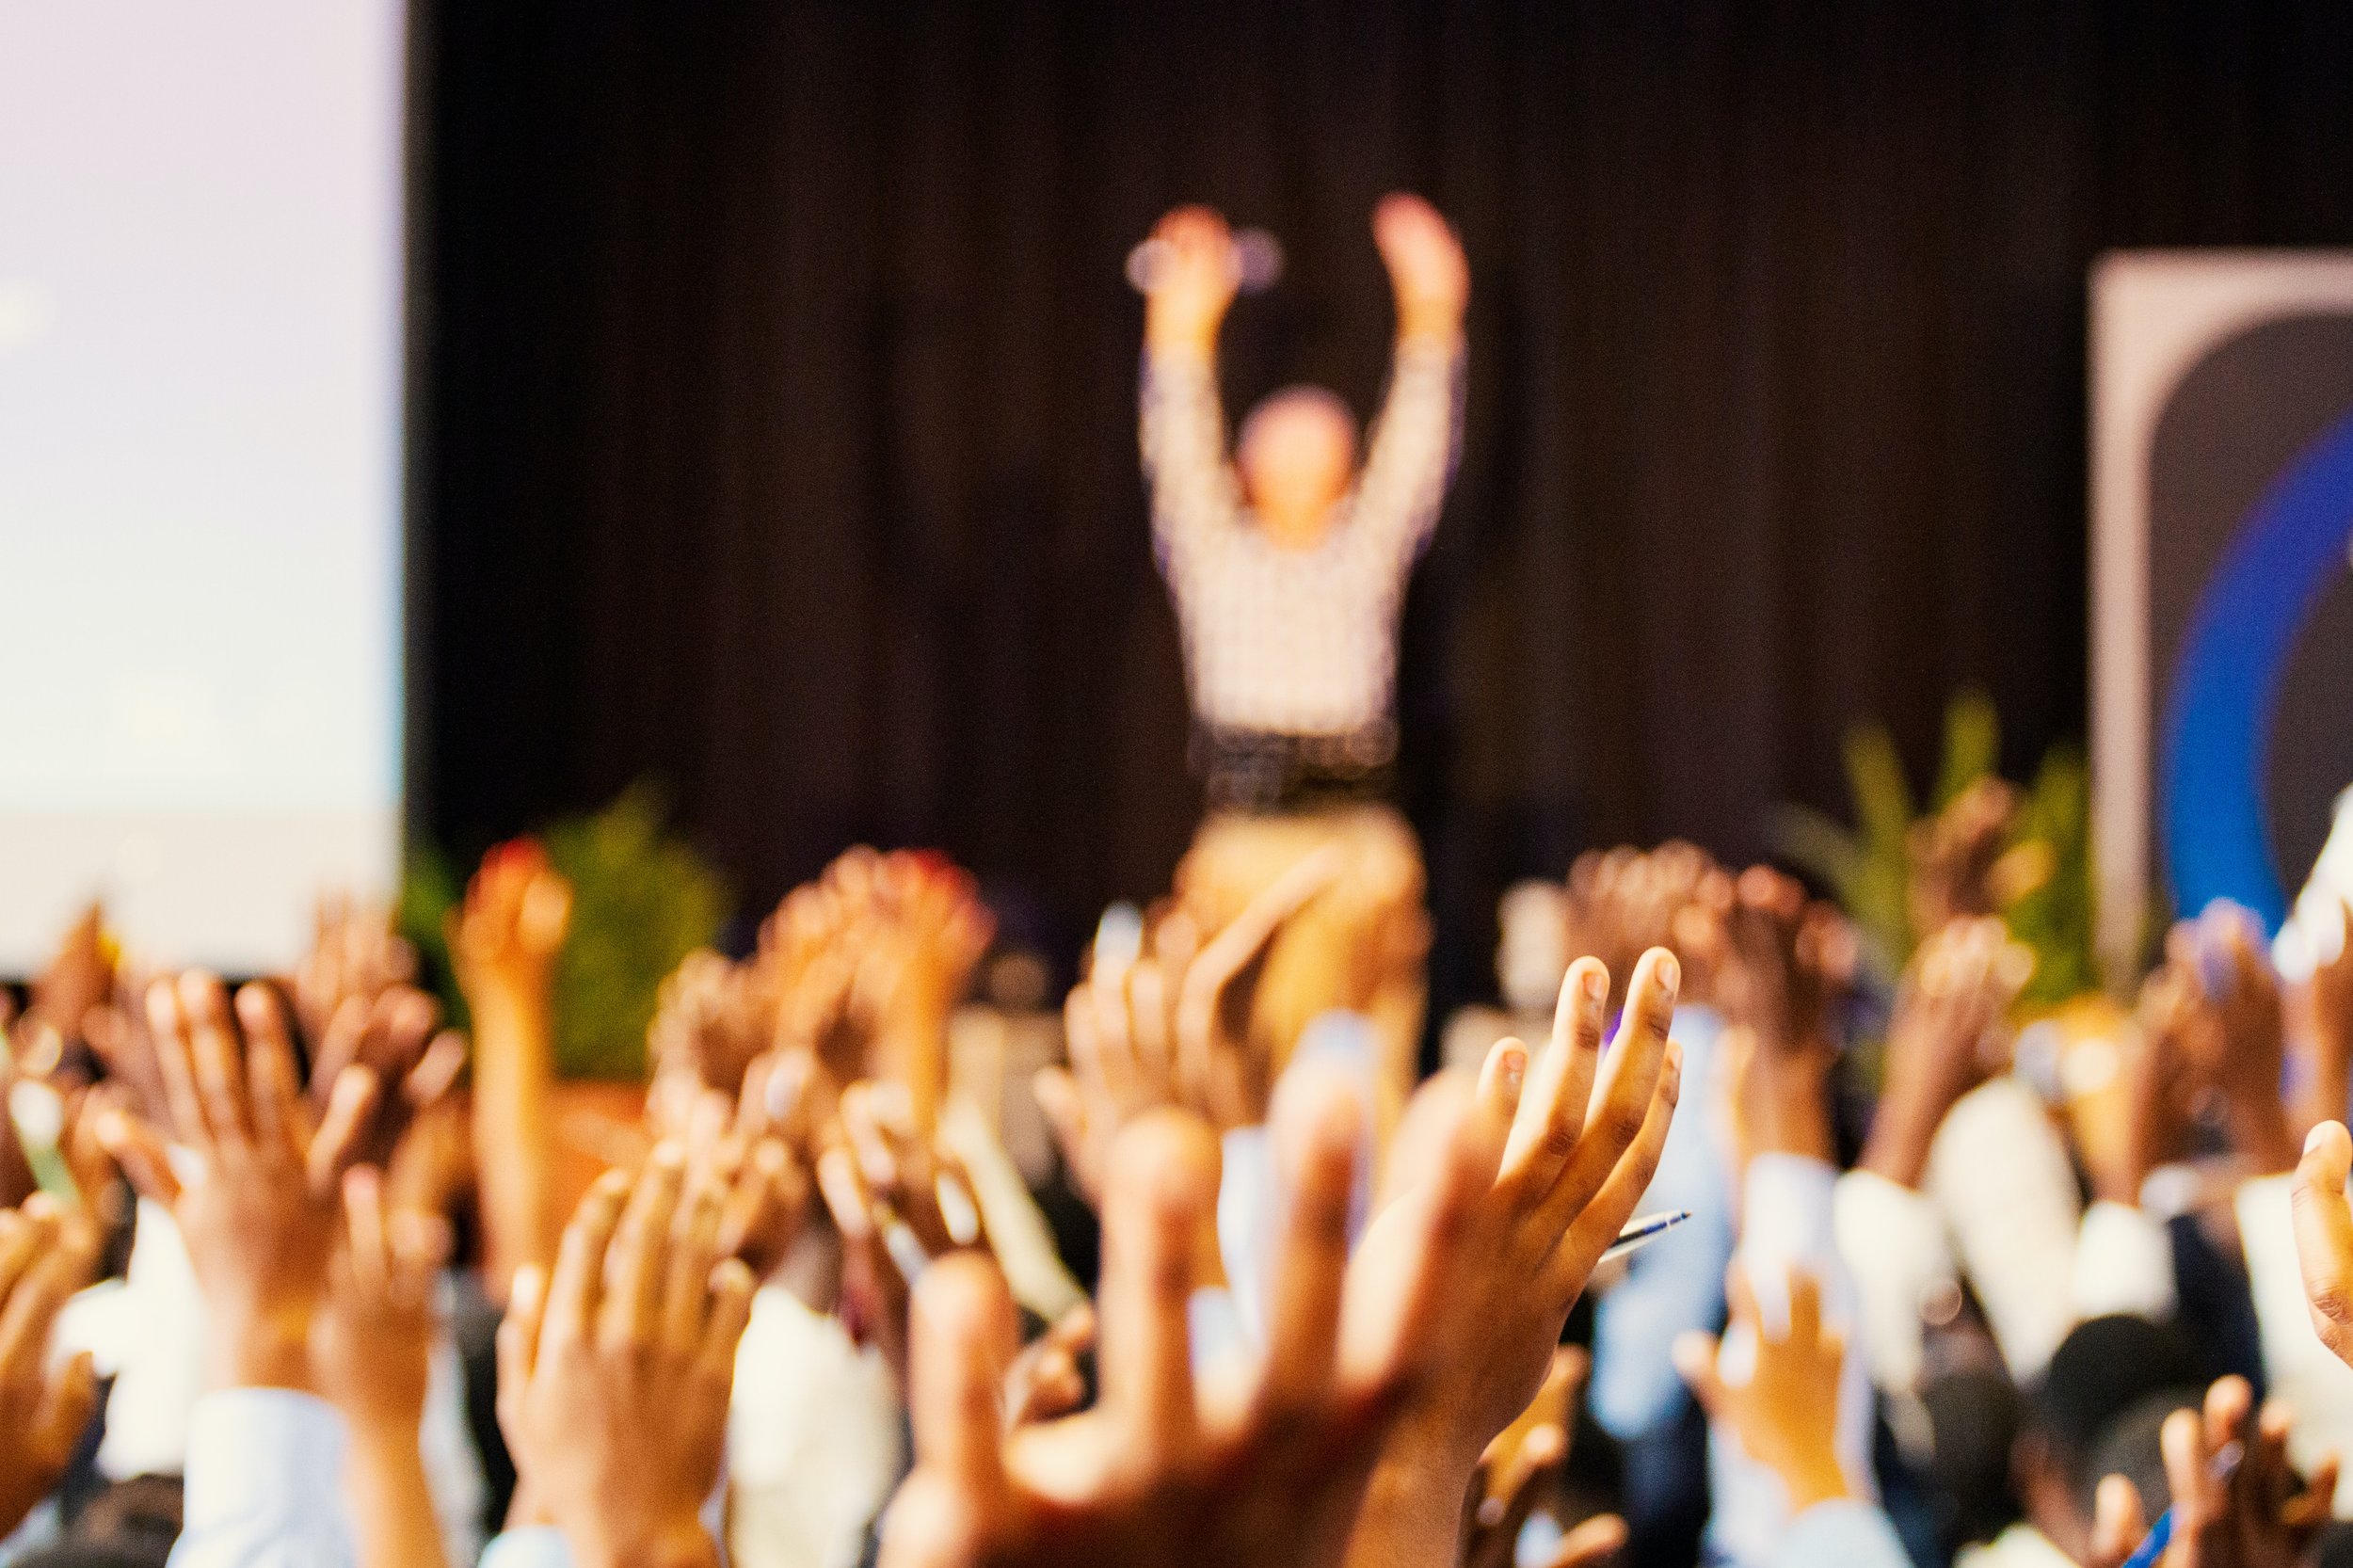 Tips for running a networking event people are genuinely excited to attend